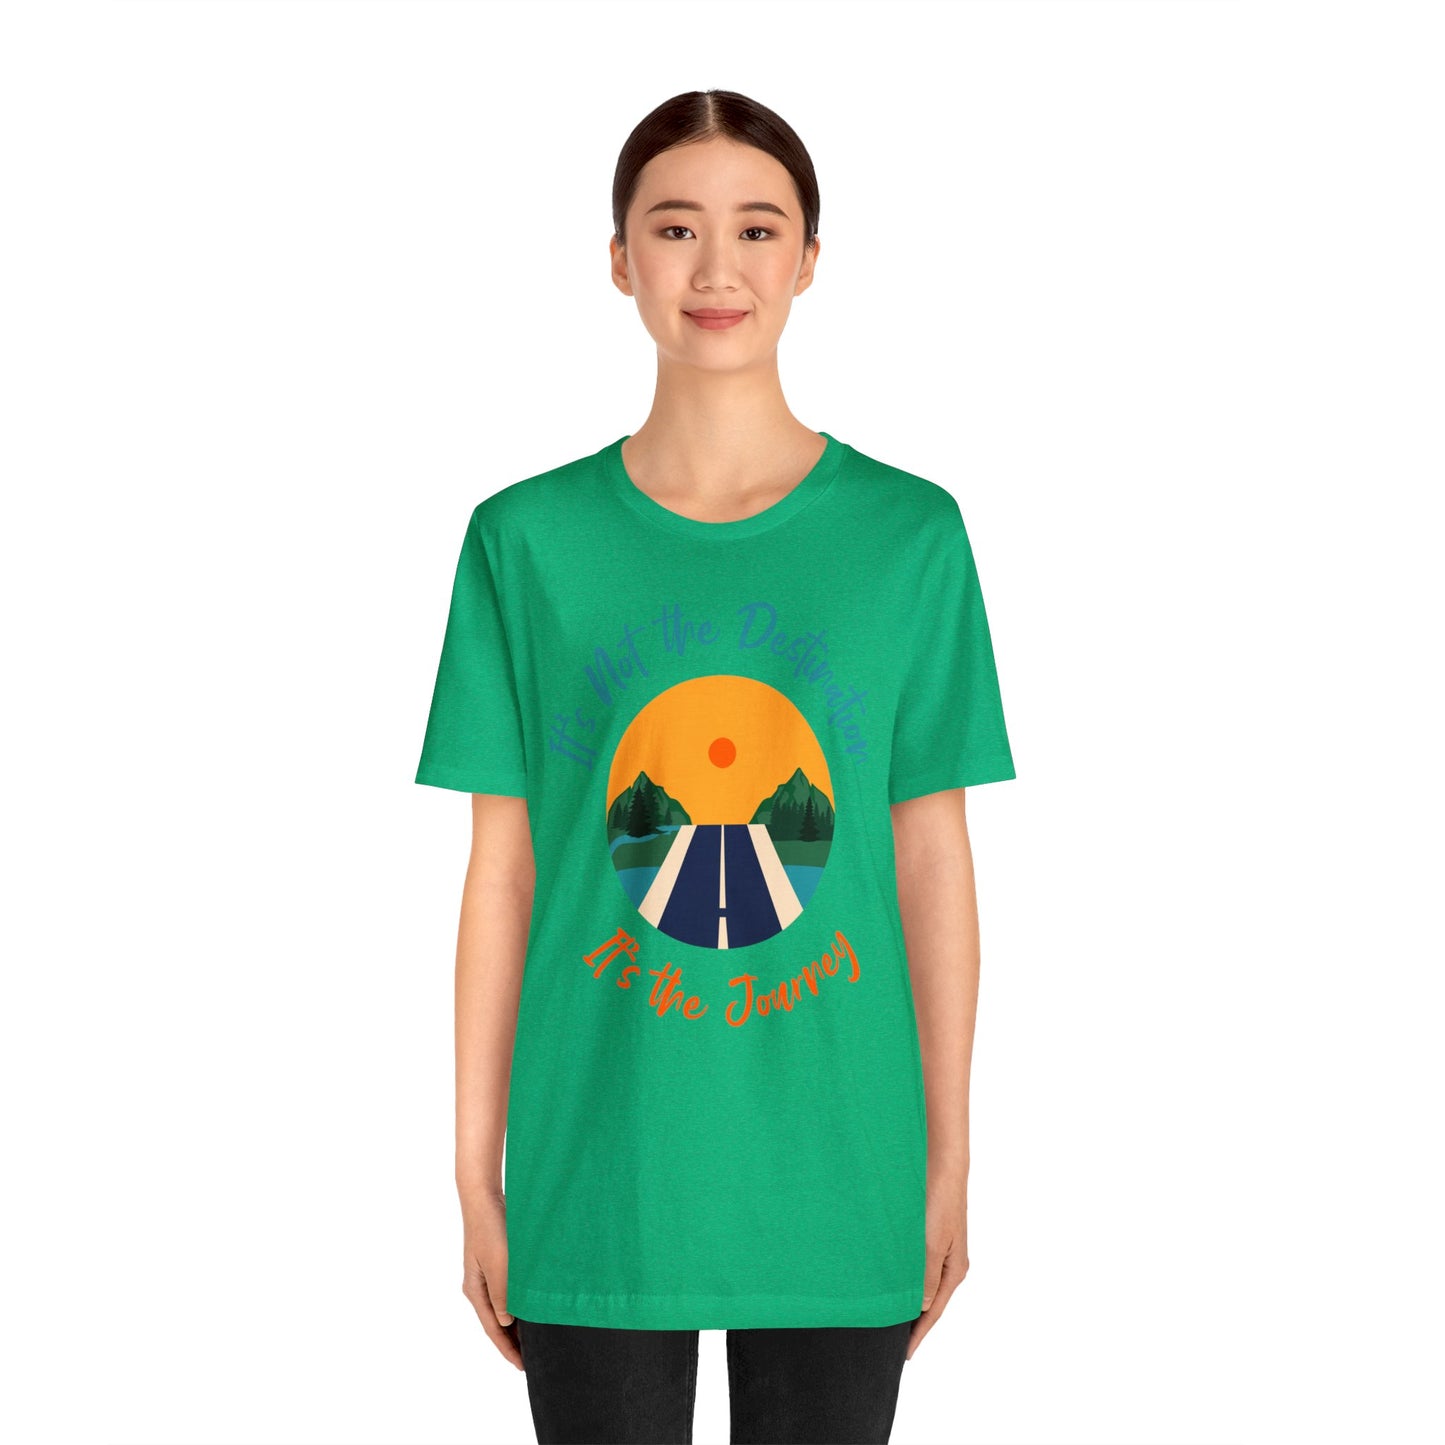 It's Not The Destination, It's The journey - Graphic T Shirt For Men and Women